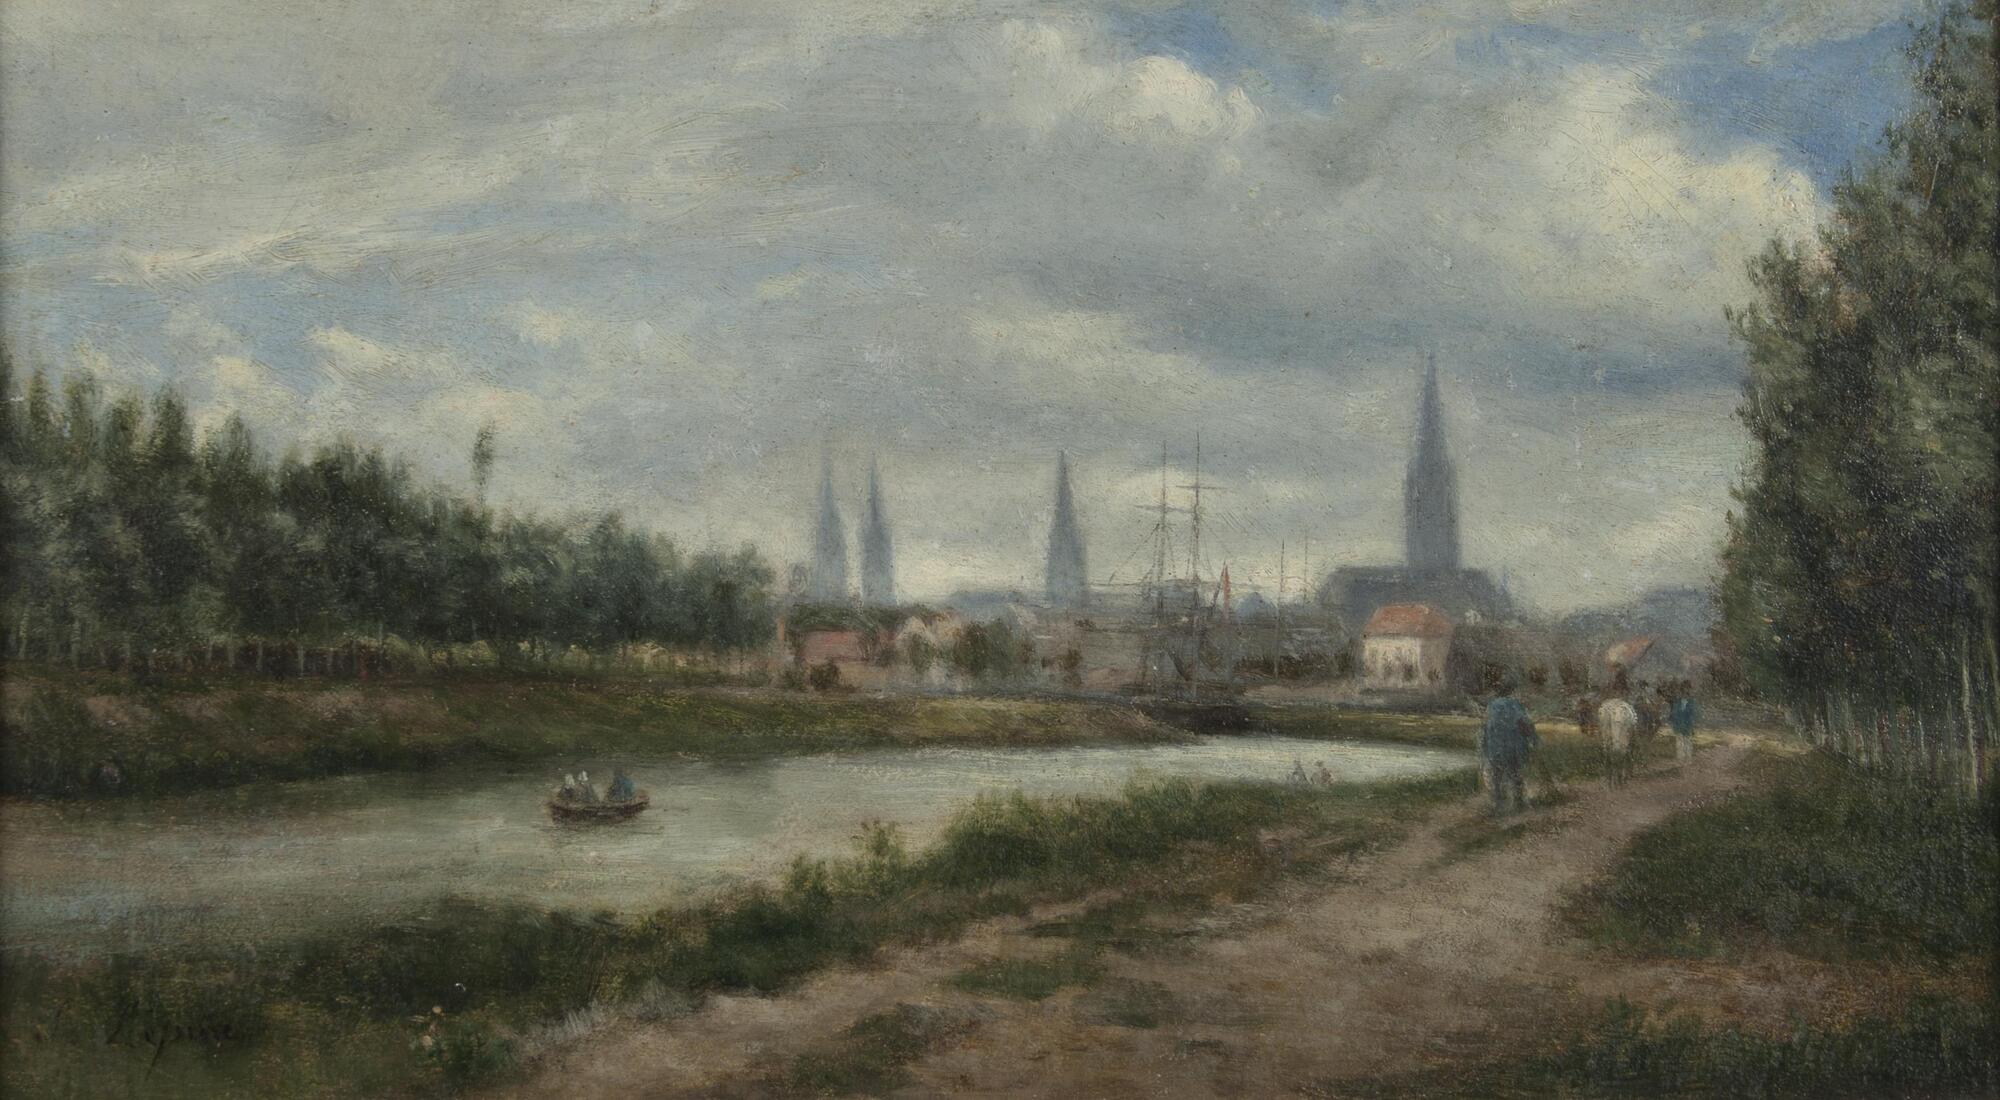 In this painting, a river stretches from the lower left corner to the middle of the composition. One small rowboat is seen in the middle of the river. Trees line both sides of the composition, receding backwards, and people walk on a path to the right of the river. A city is seen in the distance, and a cloudy blue sky dominates the upper portion of the canvas and is reflected in the river.